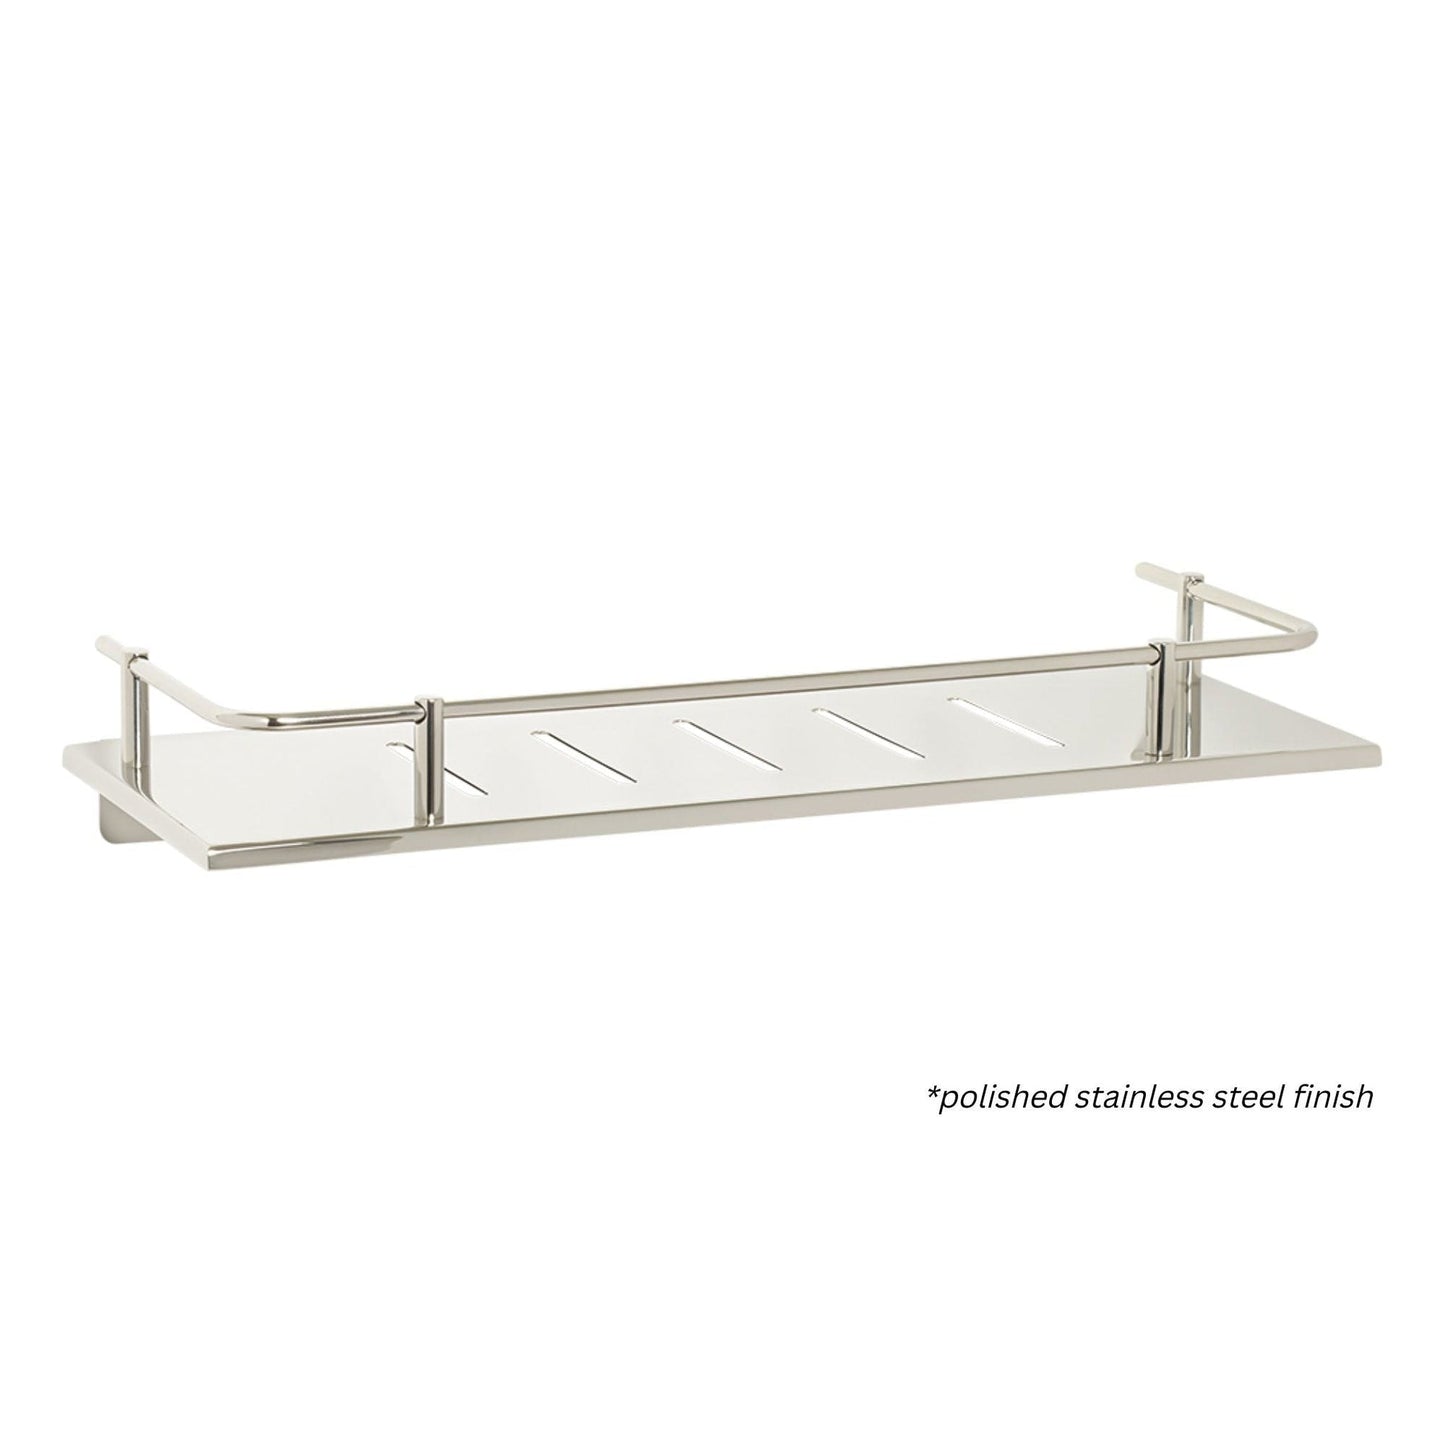 Seachrome Lifestyle and Wellness 720 Series 16" x 6" Rectangular Sundries Shower Shelf With Rail in Polished Brass Powder Coated Stainless Finish